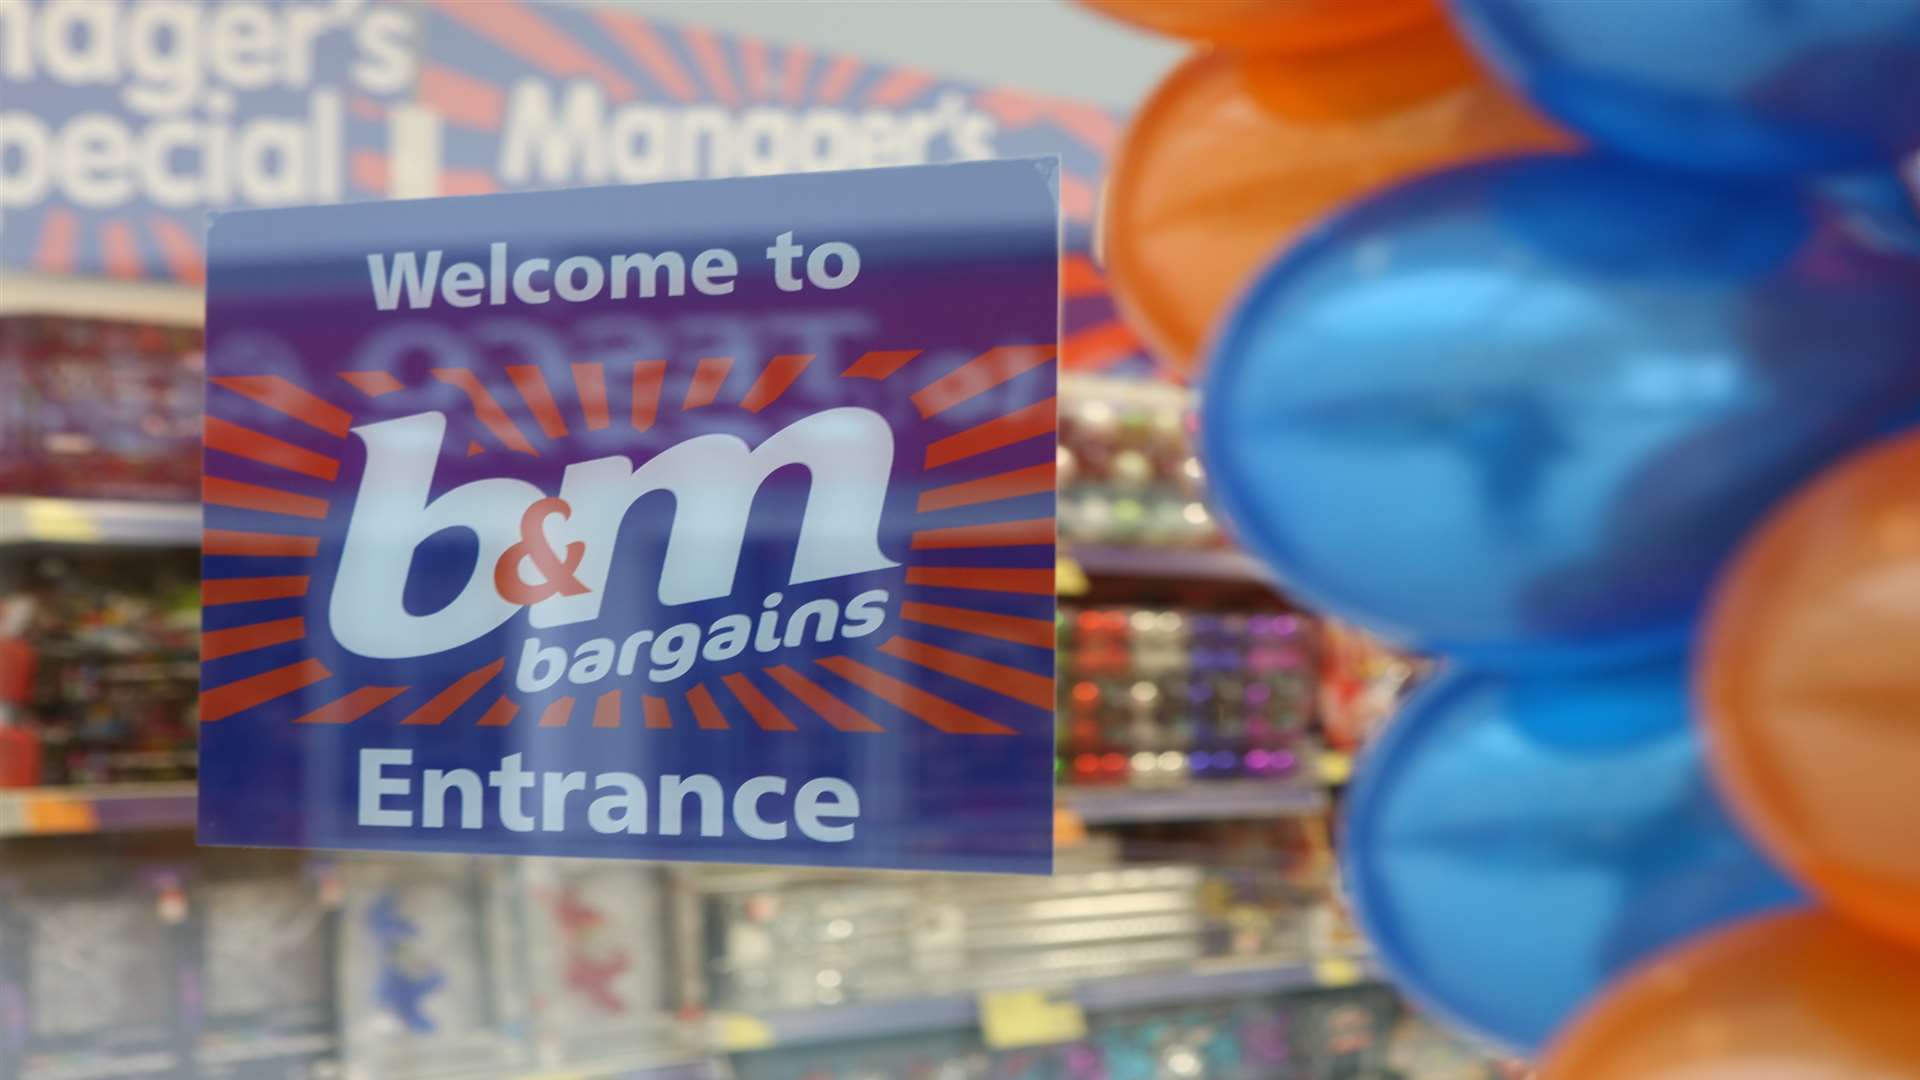 B&M Bargains has reopened with a new look.